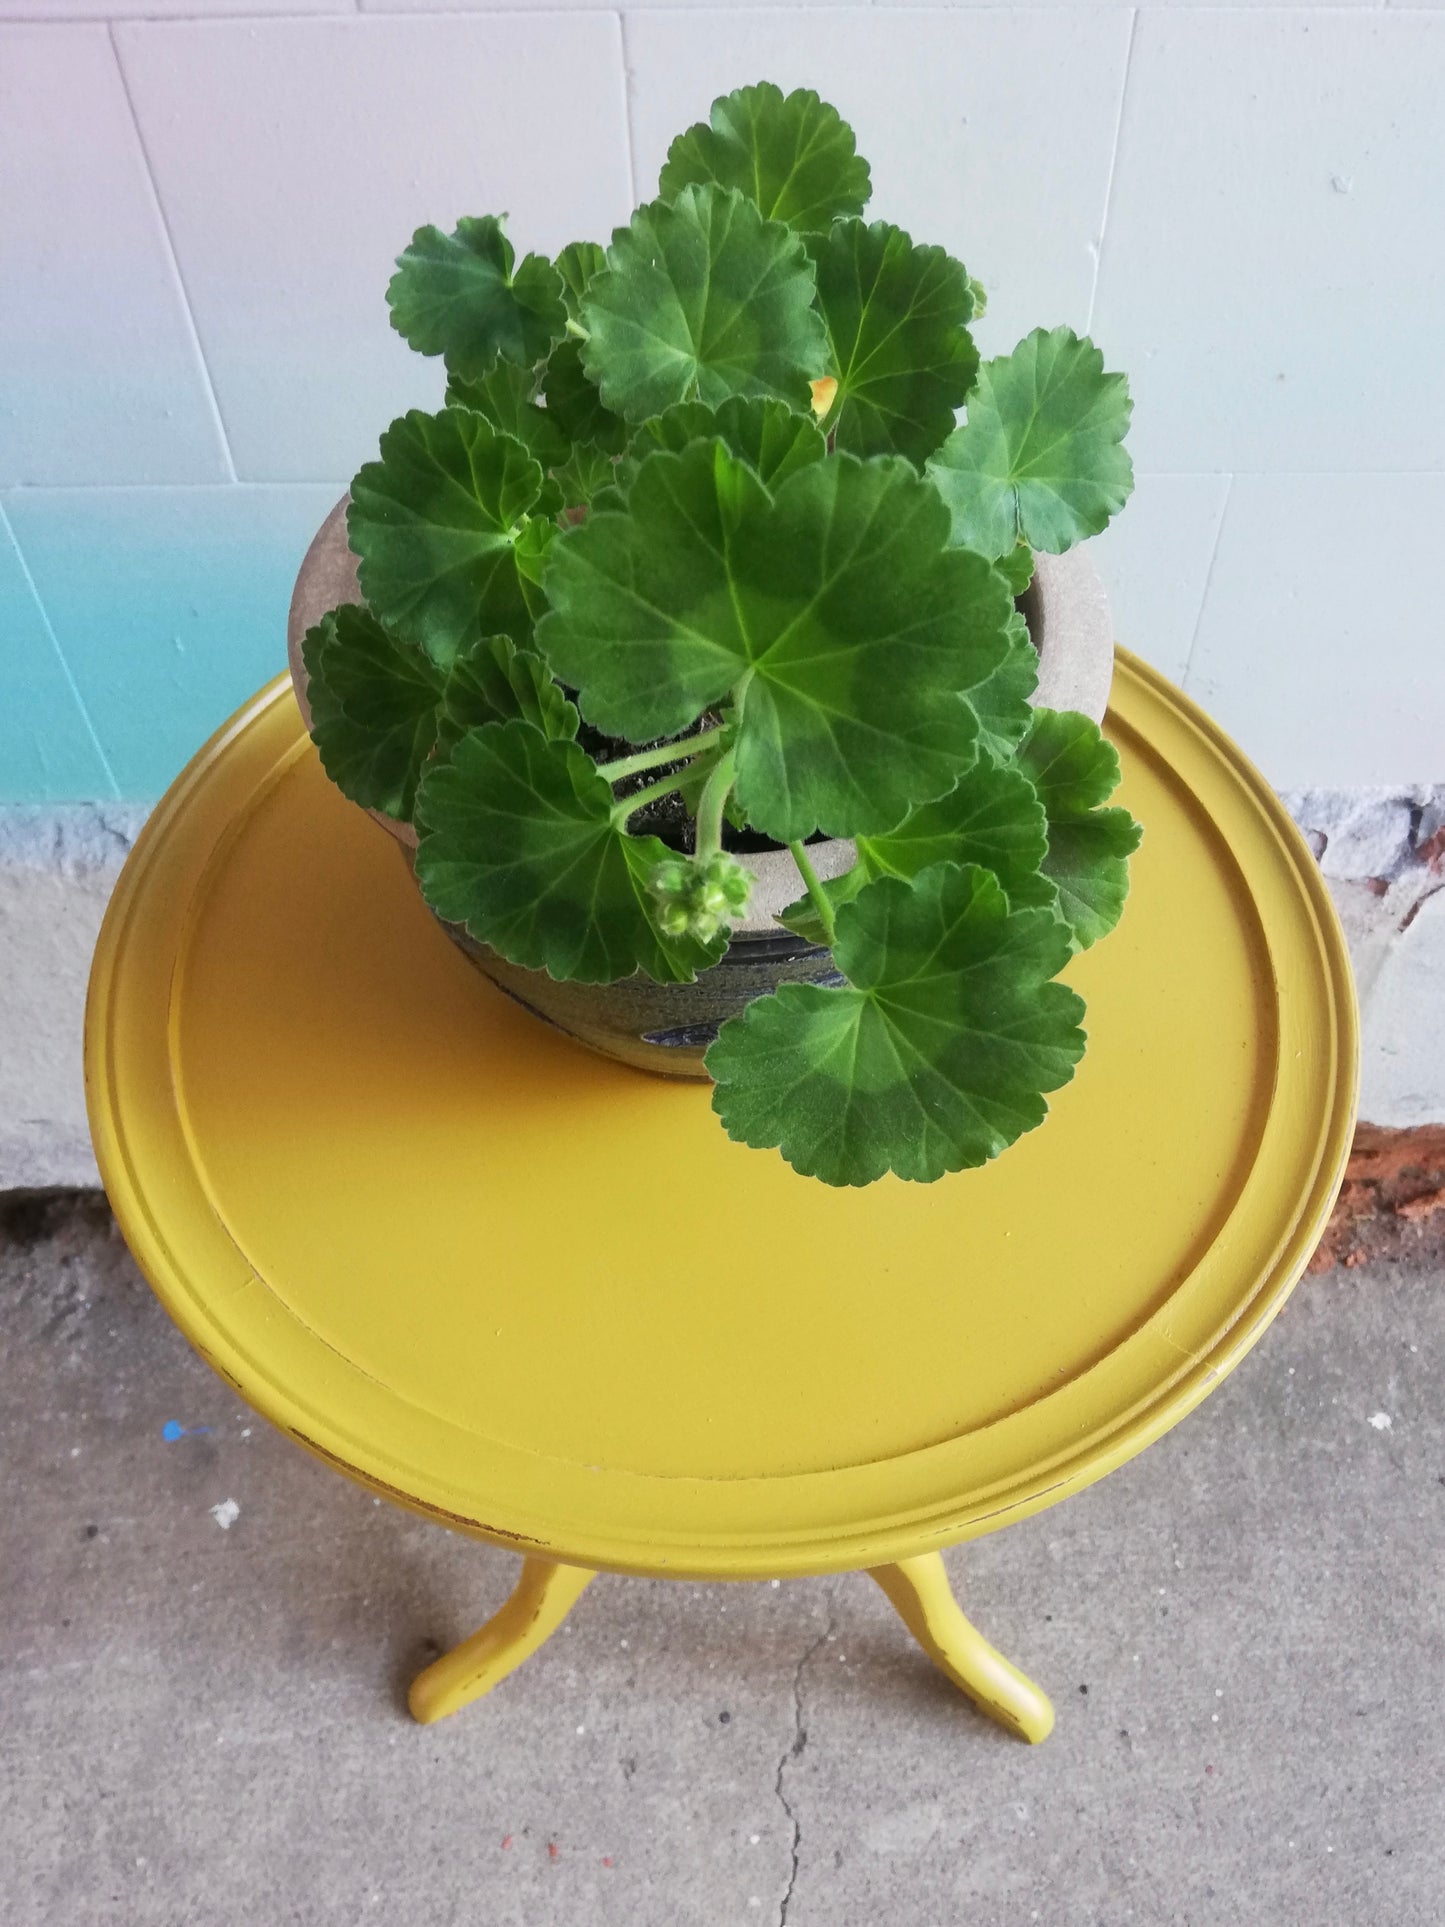 Vintage Wooden Plant Stand  / side table painted in mustard